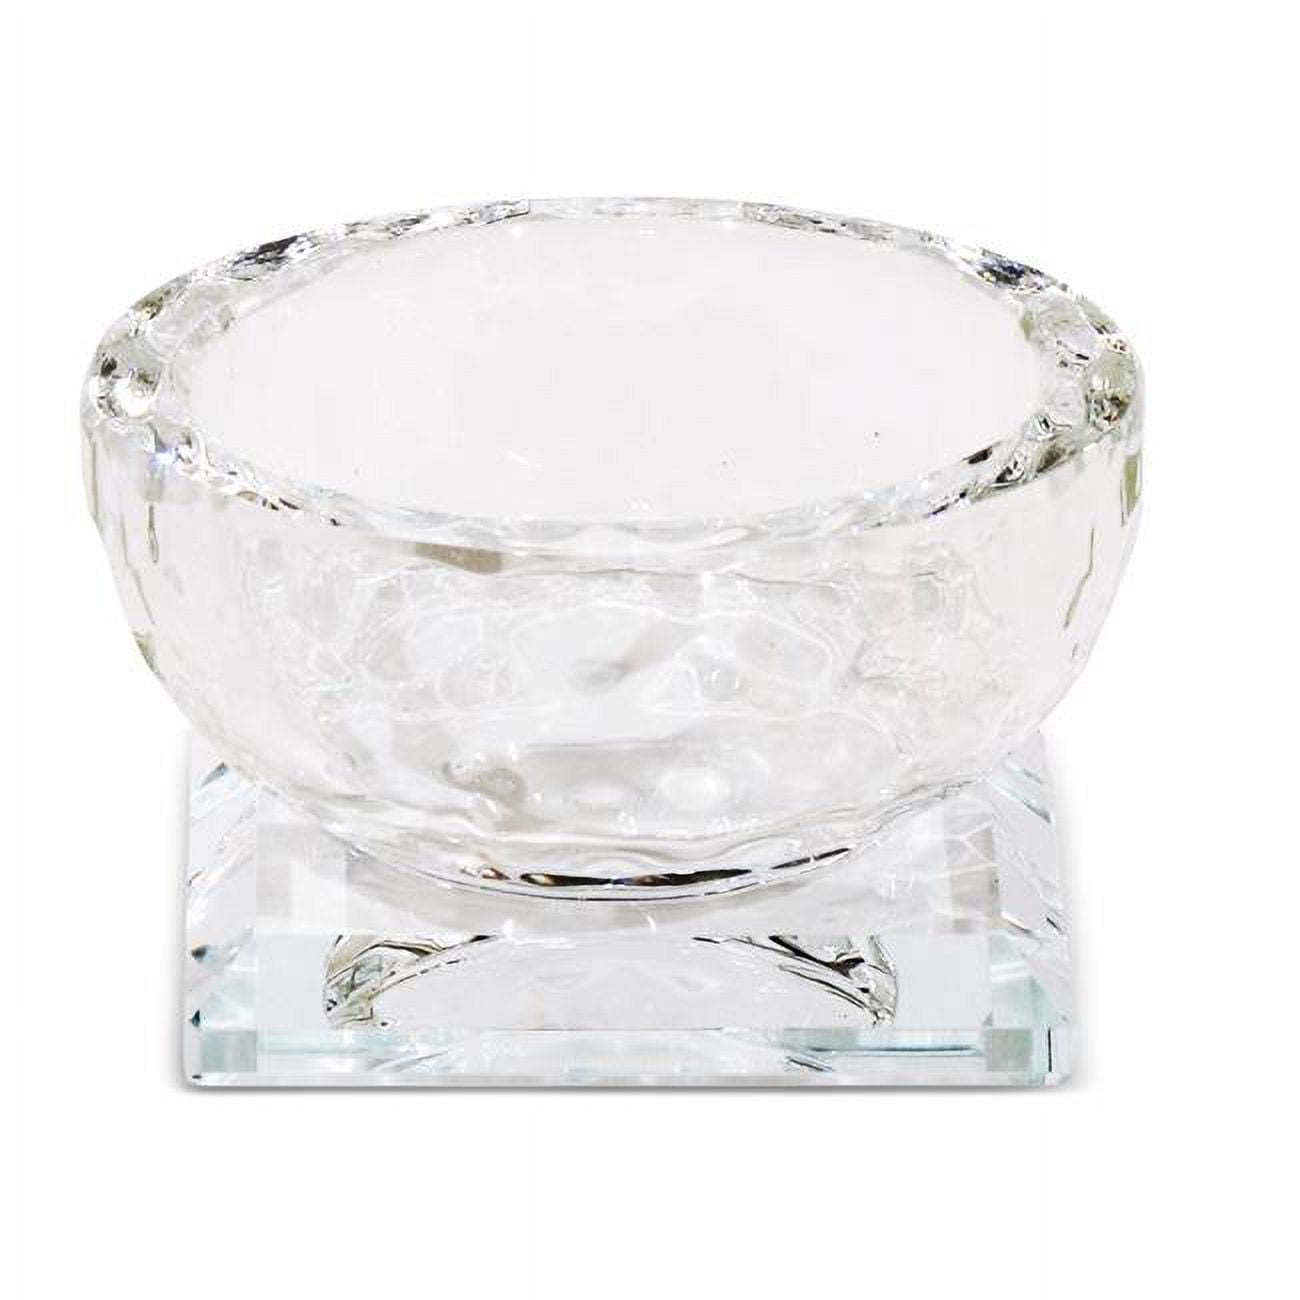 Picture of Schonfeld Collection 182916 2 x 2 in. Crystal Dish with Salt & Honey Holder - Clear